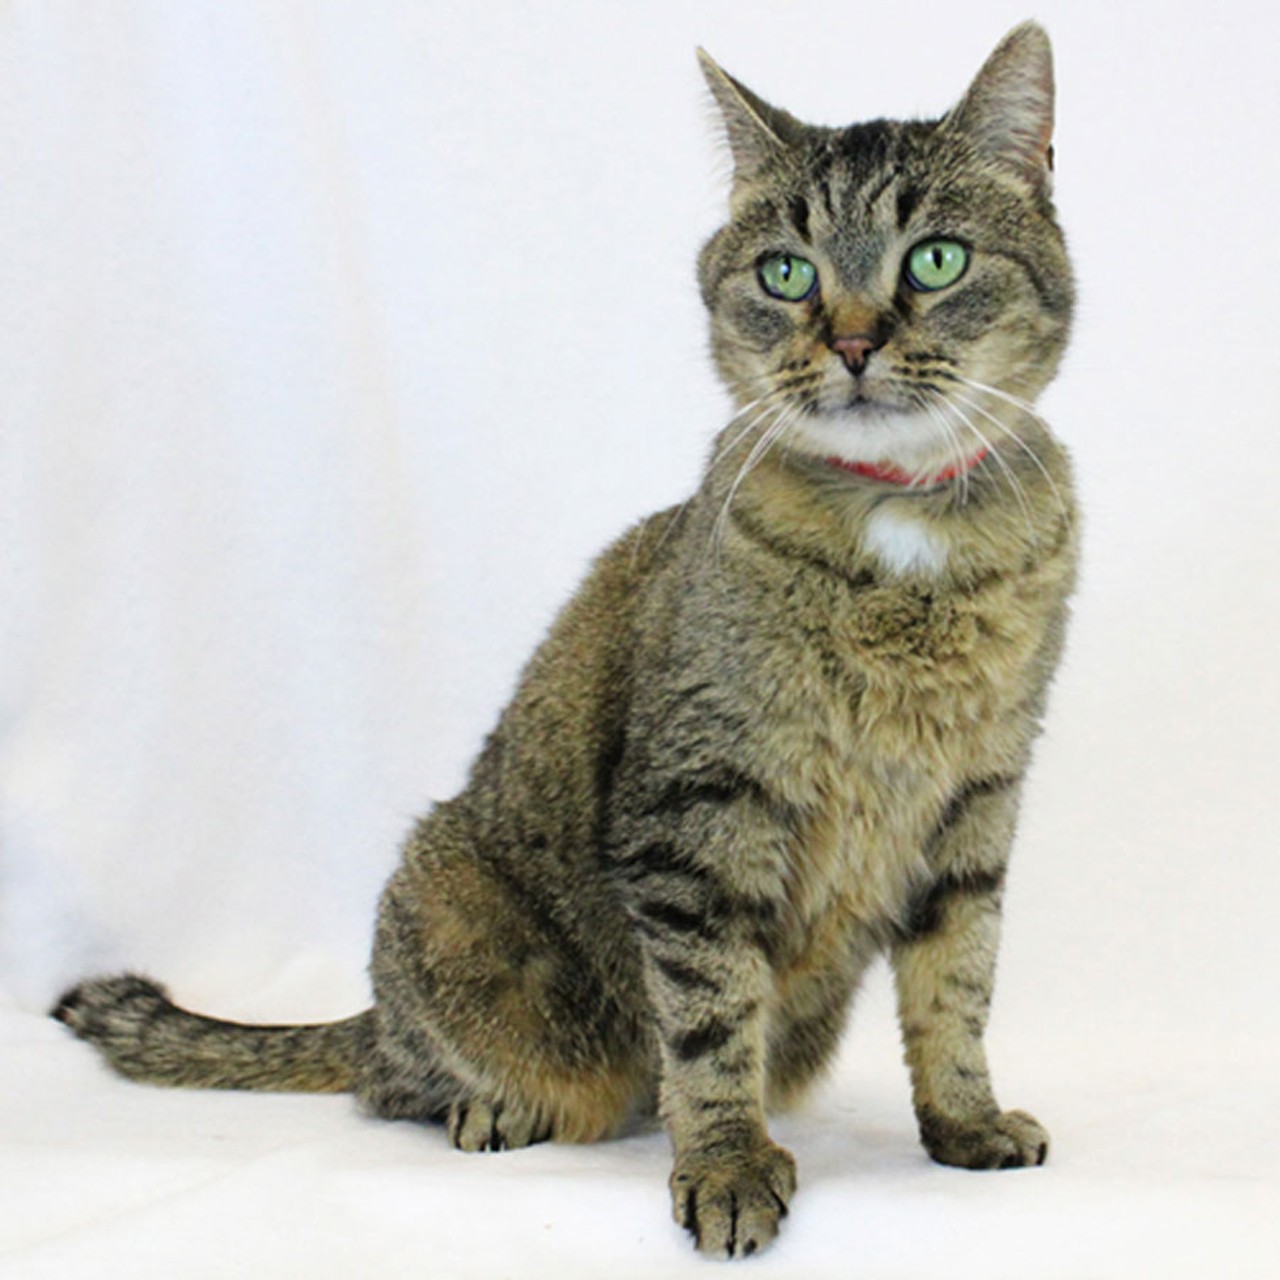 NAME: Corina
GENDER: Female
BREED: Domestic Short Hair
AGE: 10 years, 4 months
WEIGHT: 10 pounds
SPECIAL CONSIDERATIONS: None
REASON I CAME TO MHS: Homeless in Dearborn Heights
LOCATION: Premier Pet Supply of Novi
ID NUMBER: 793881